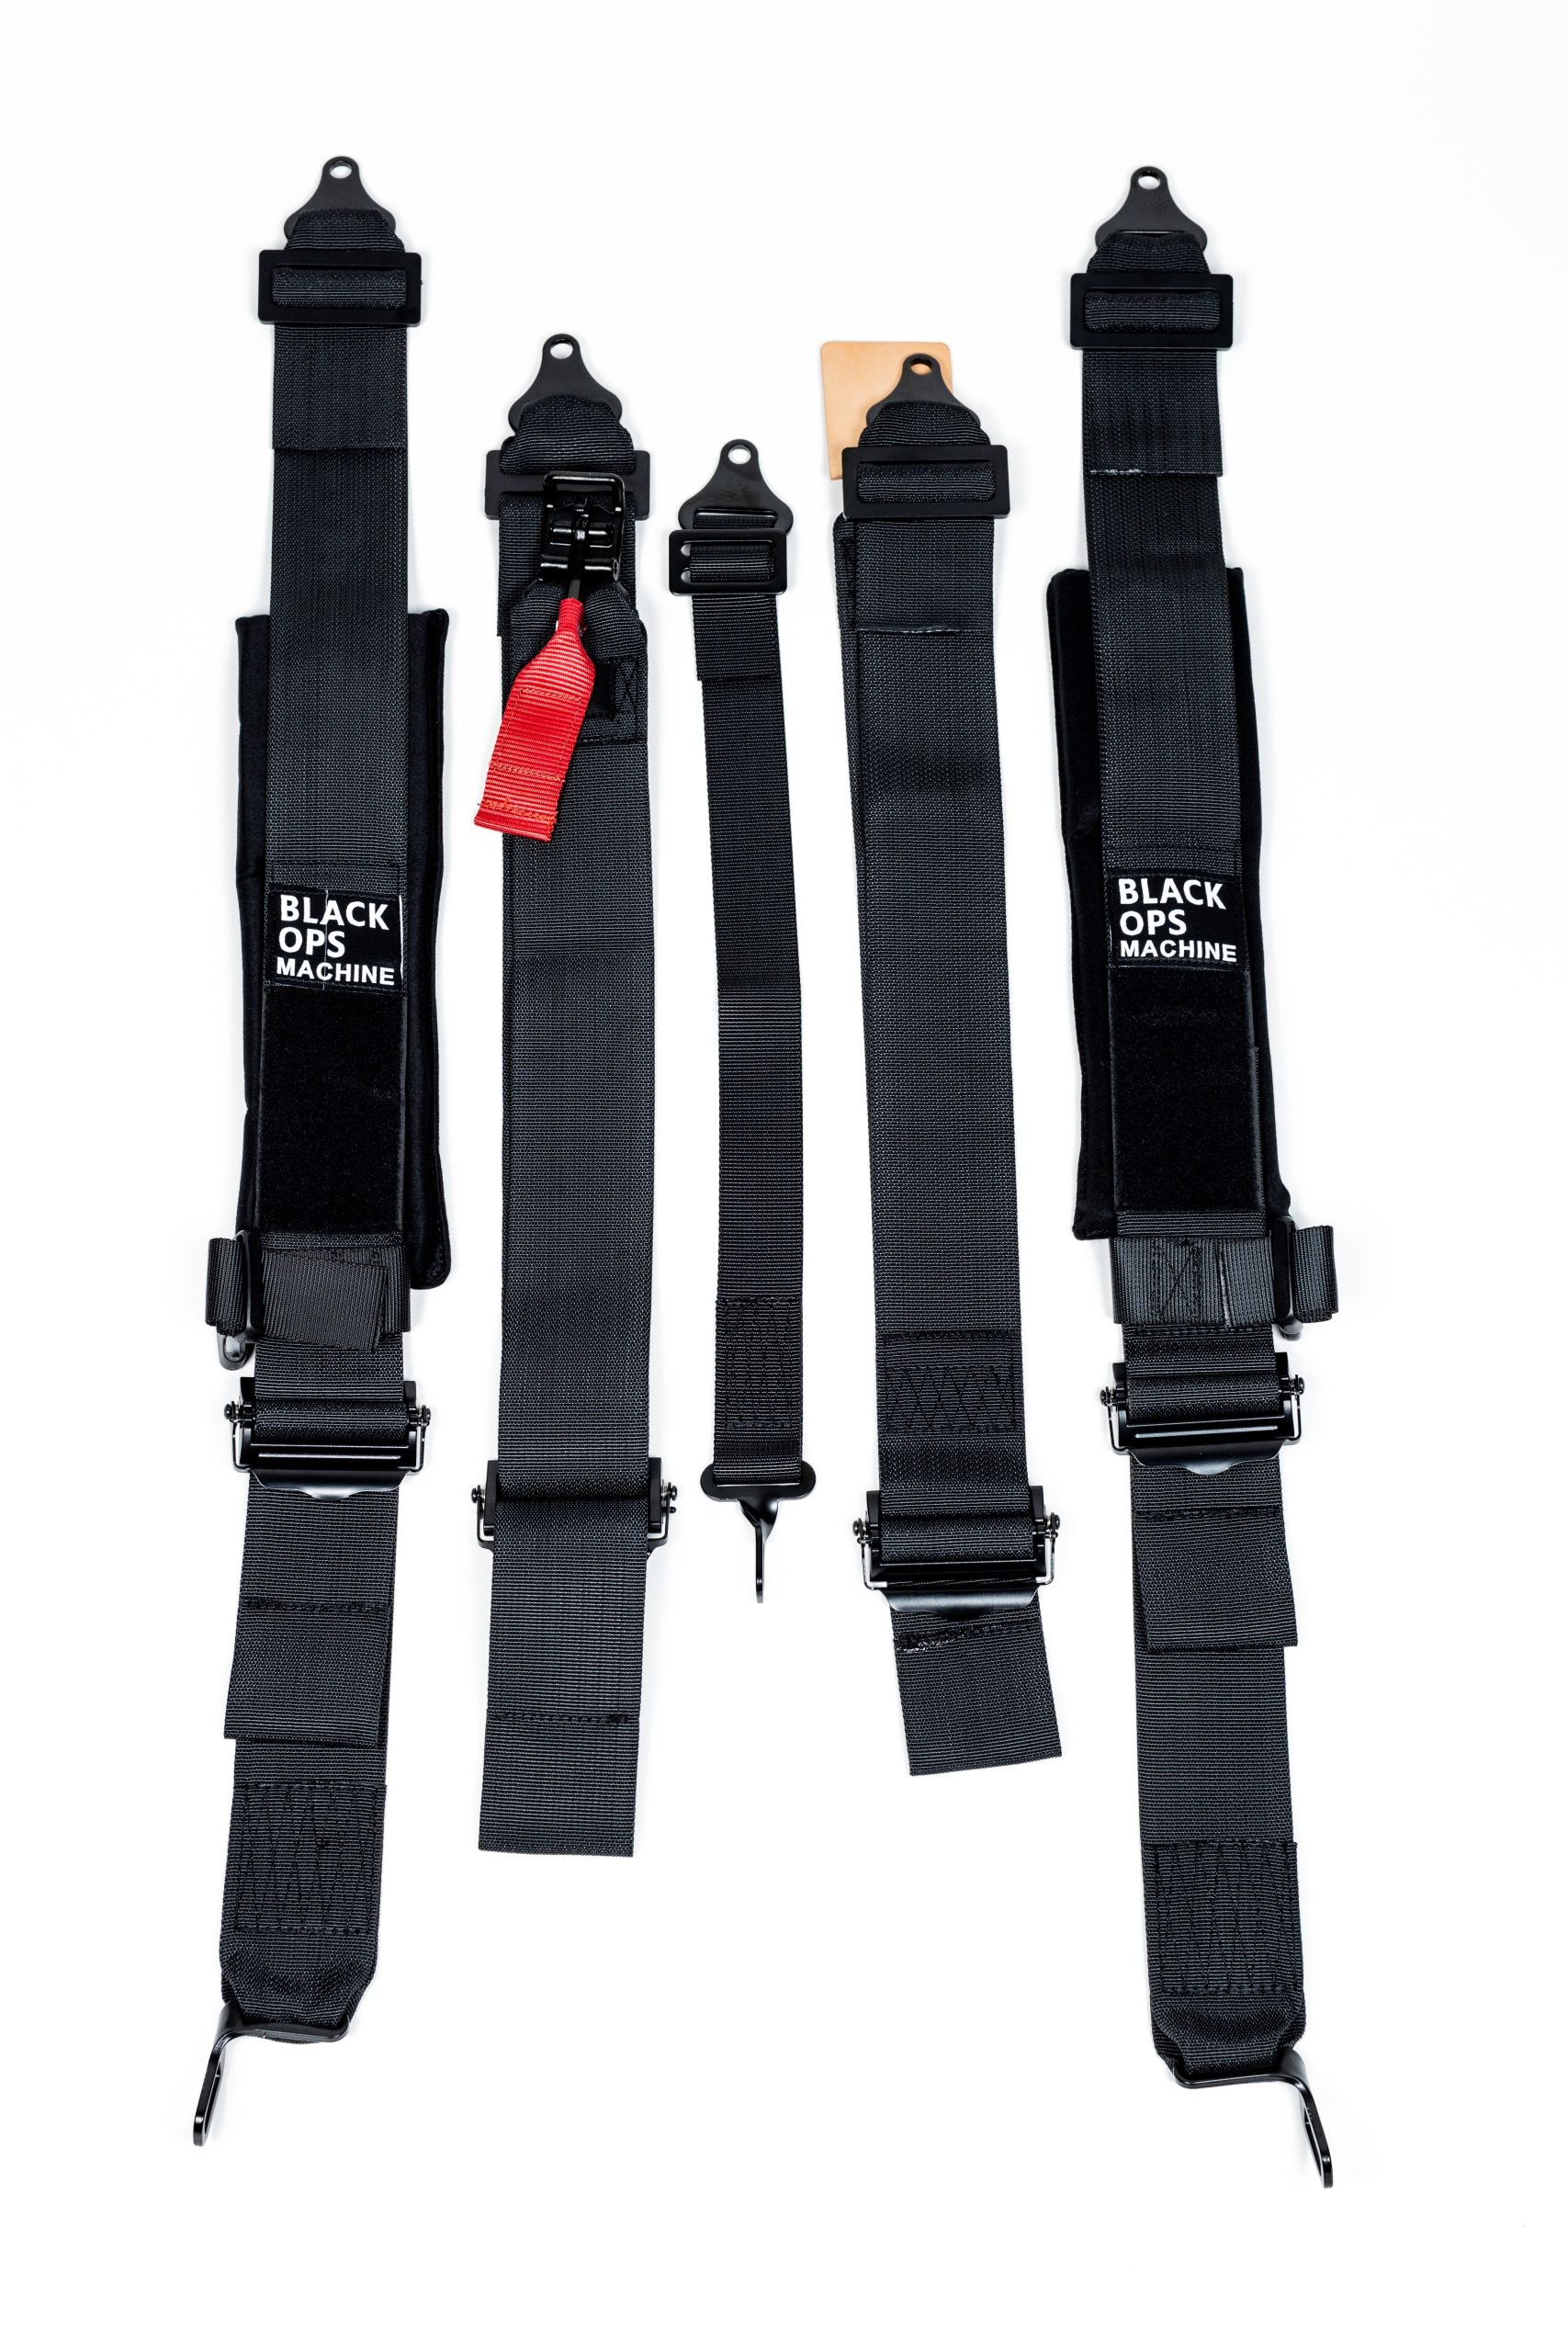 Black Ops 5 POINT HARNESSES